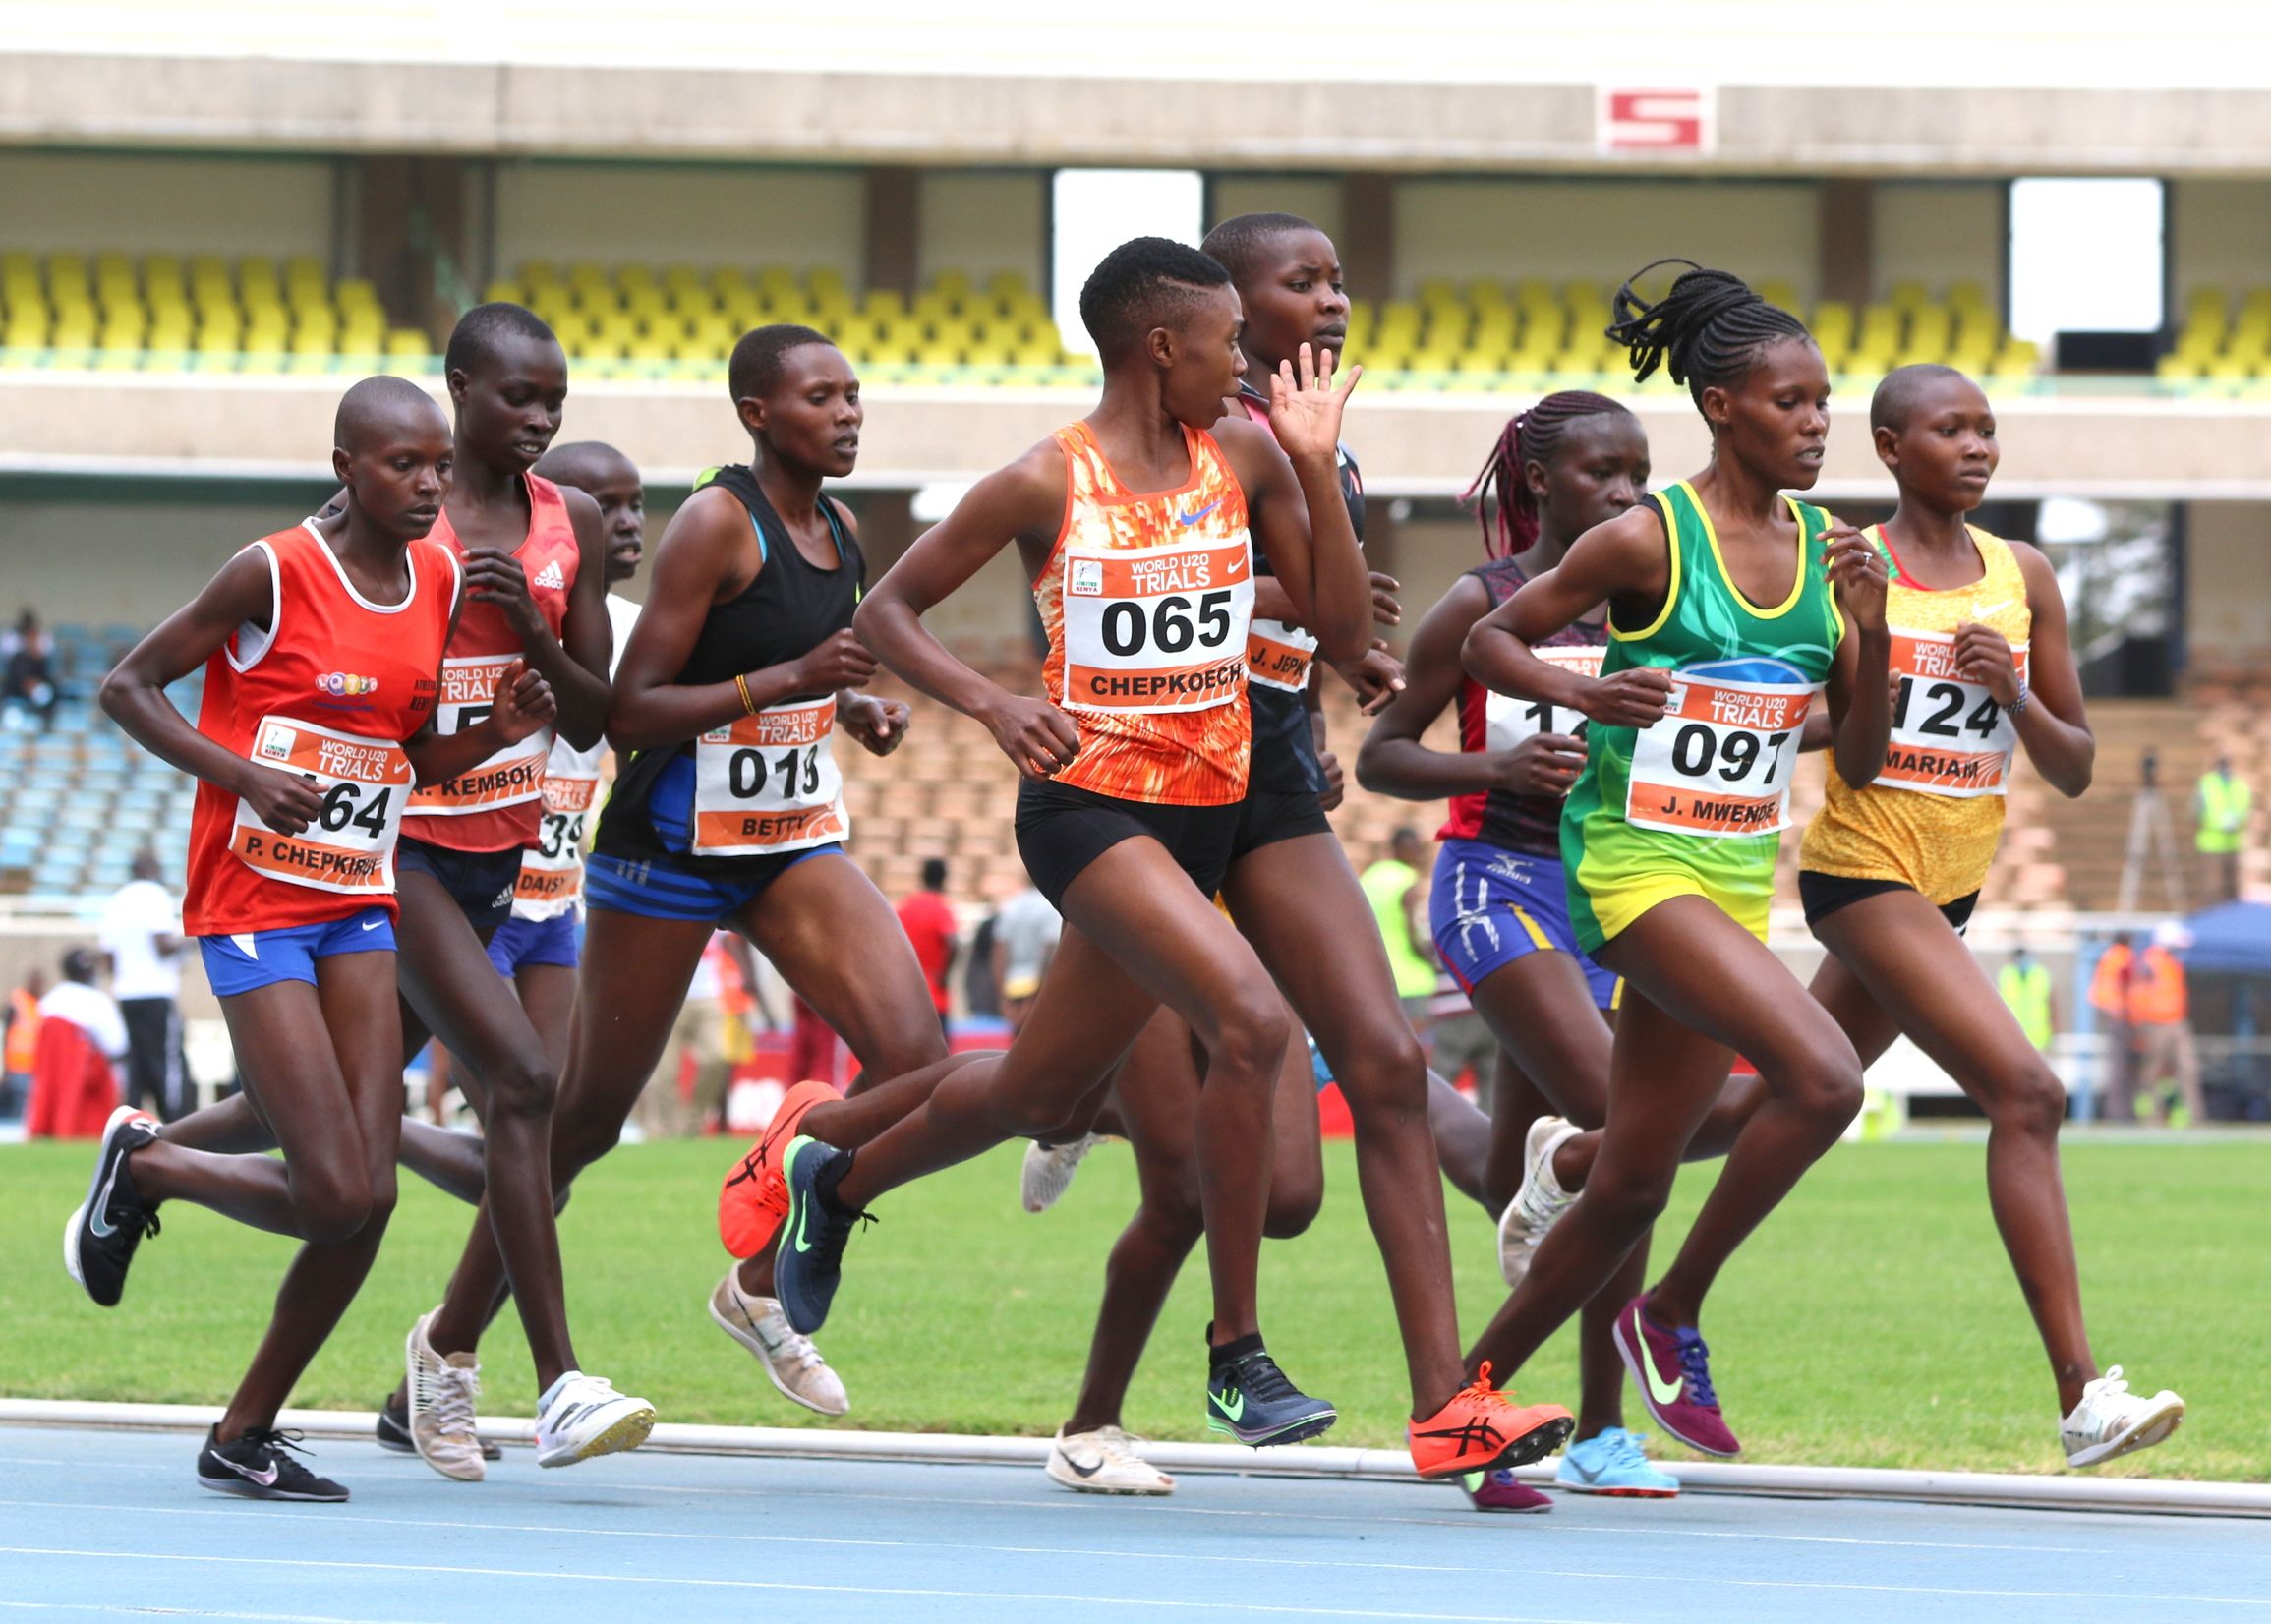 Day One of The World Athletics Under 20 Championships Trials News